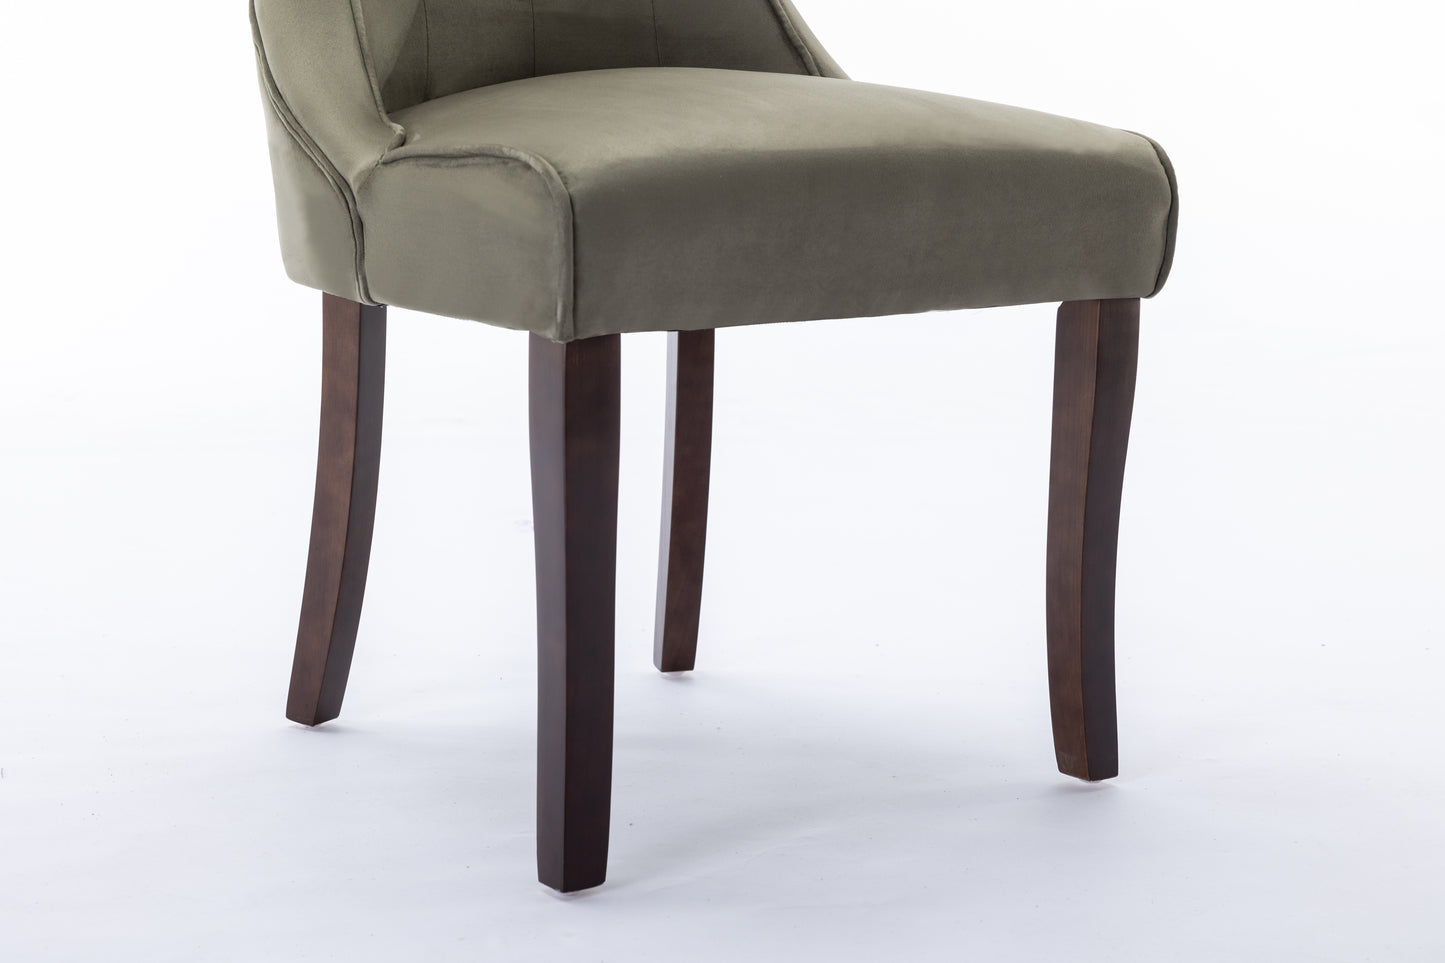 Kingston Olive Green Faux Suede Dining Chair